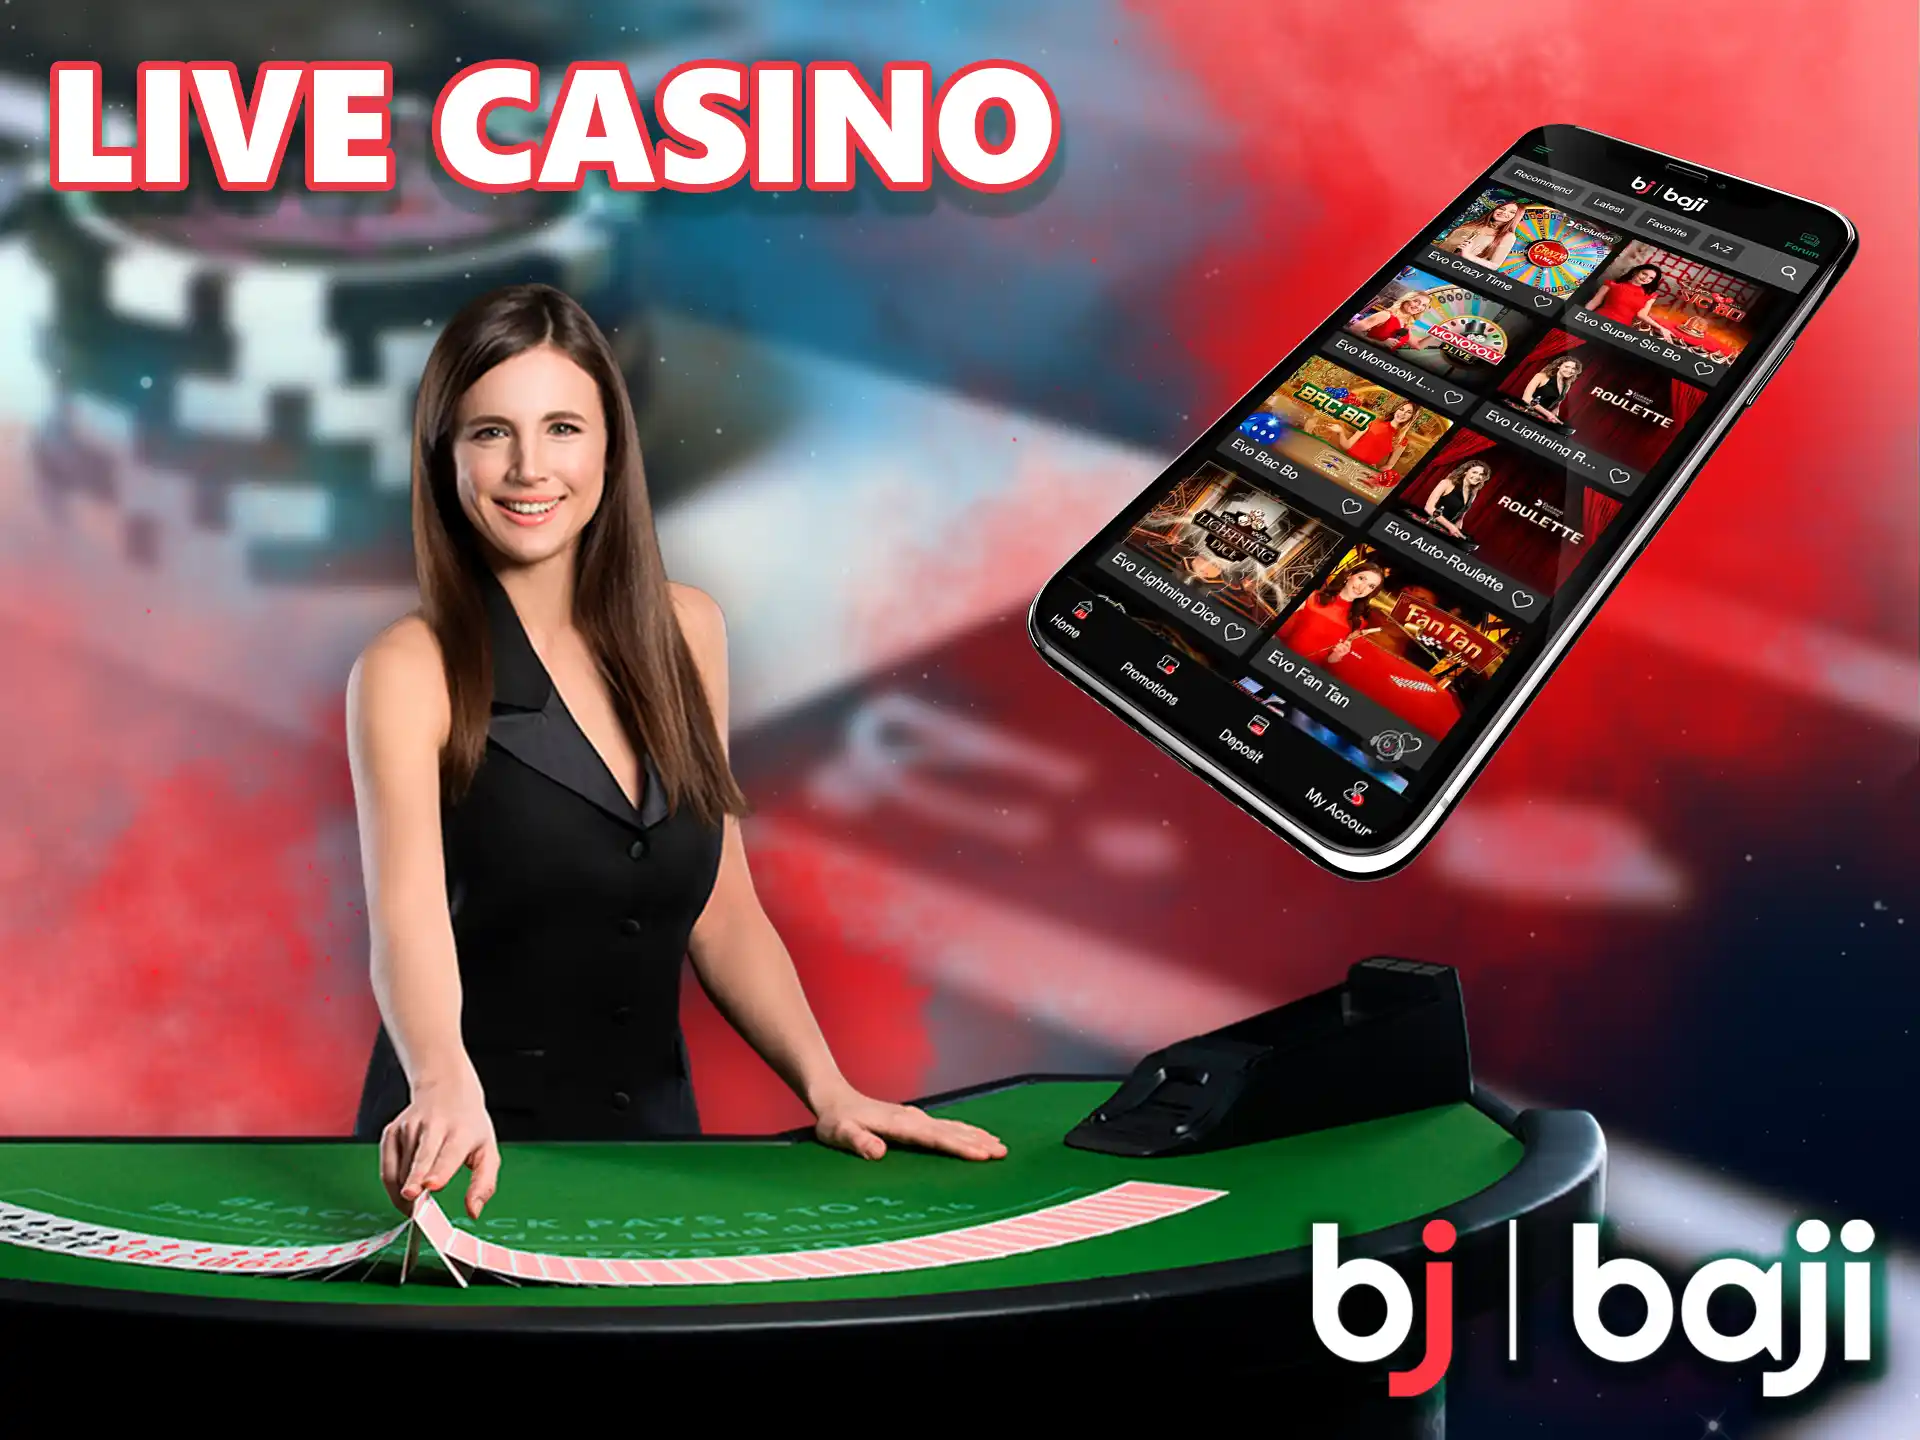 Try your hand at this exciting form of gaming at Baji App Casino, here you will be playing with a real person in real time.